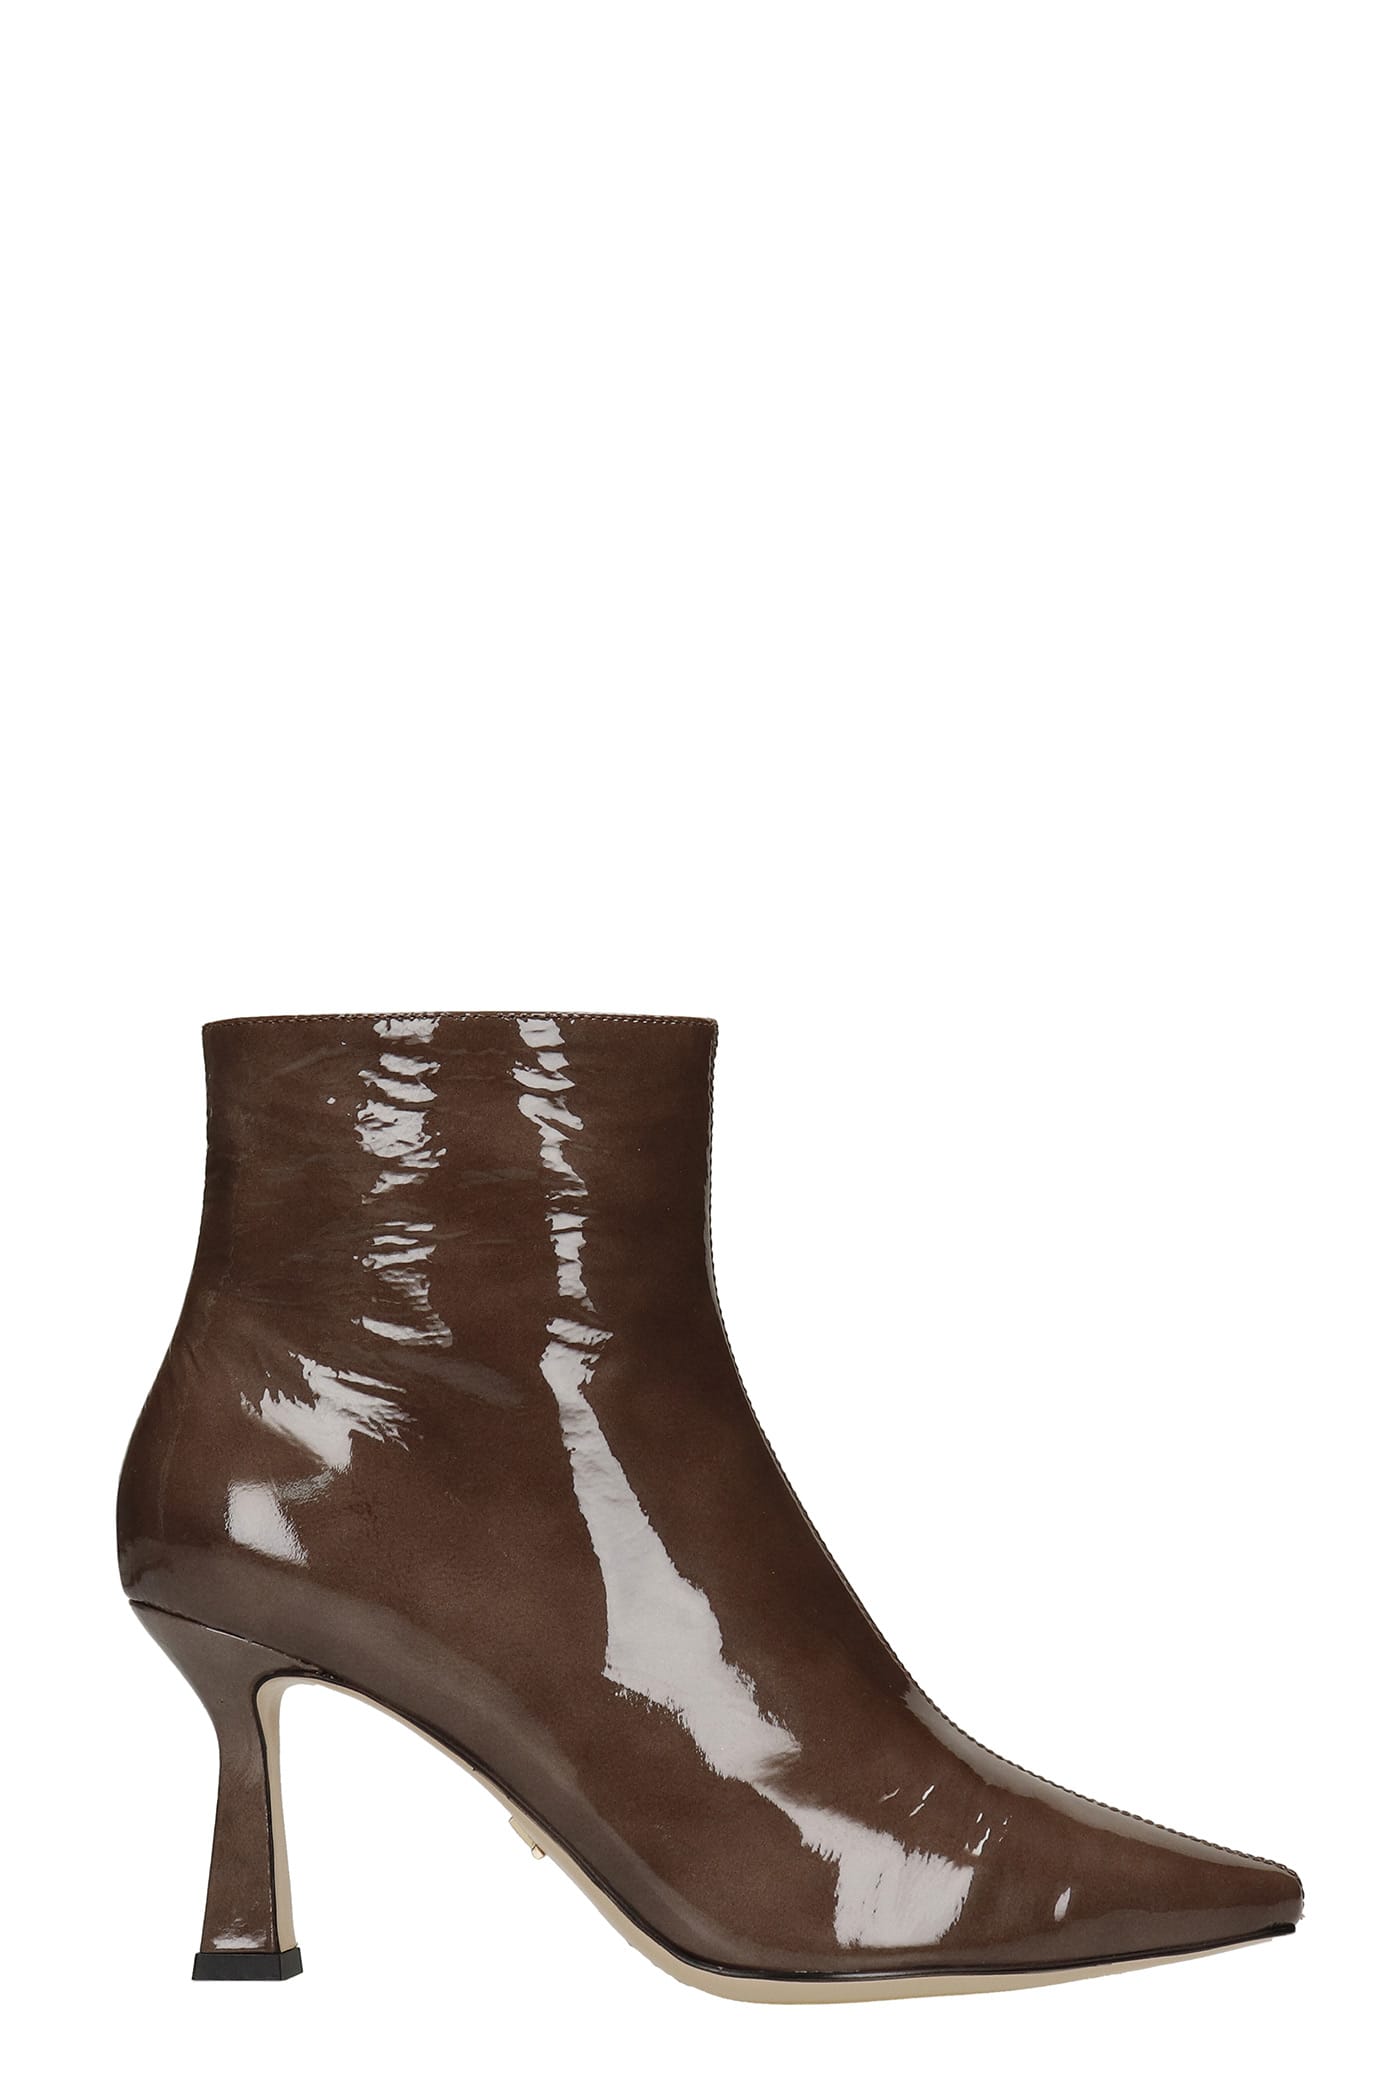 Lola Cruz High Heels Ankle Boots In Taupe Patent Leather